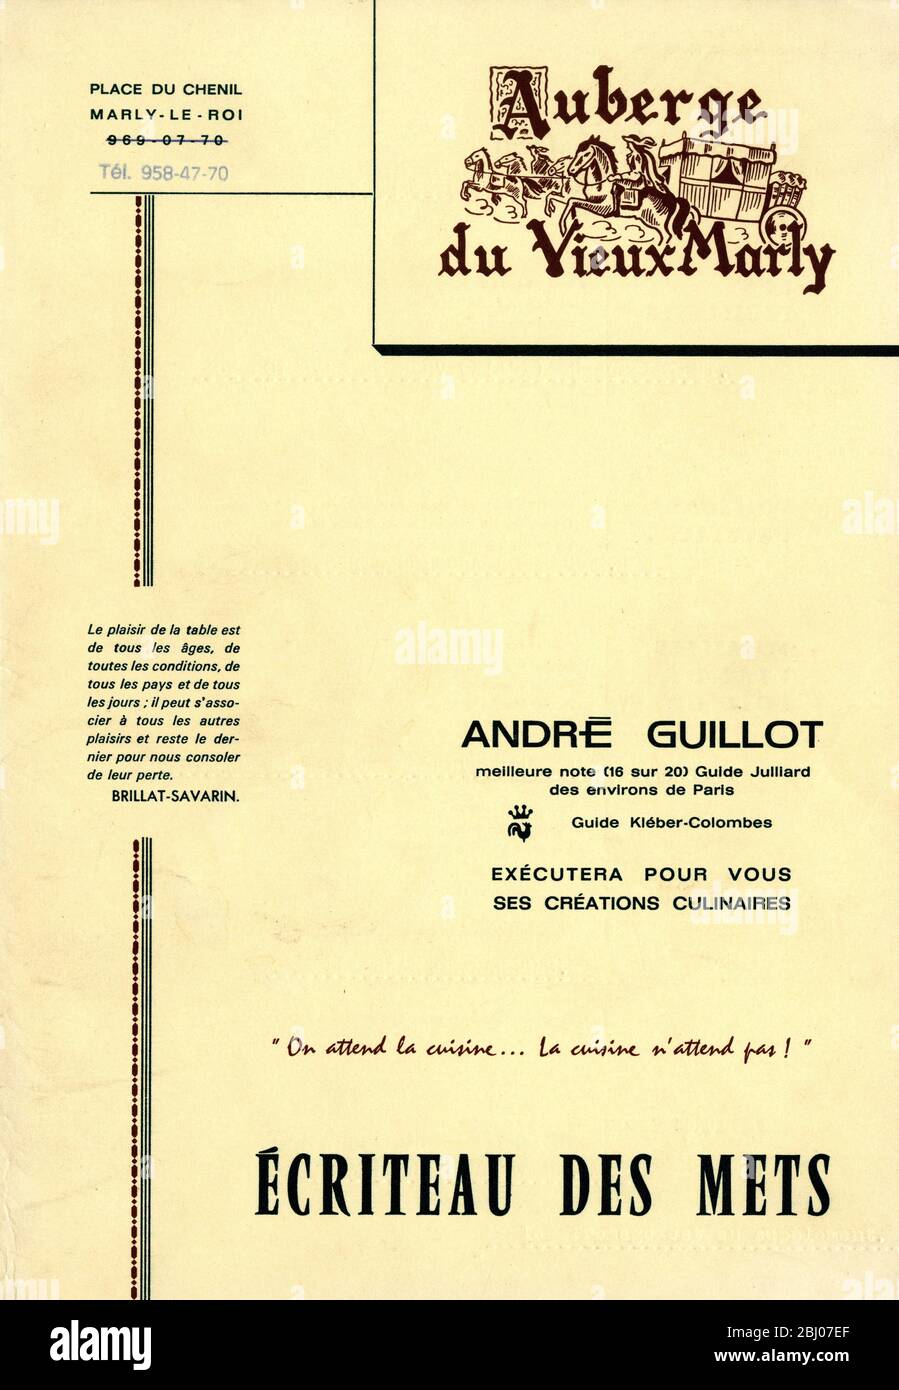 Carrier Collection of Menus - Auberge Du Vieux Marly - Marly-le-Roi, Francia Foto Stock